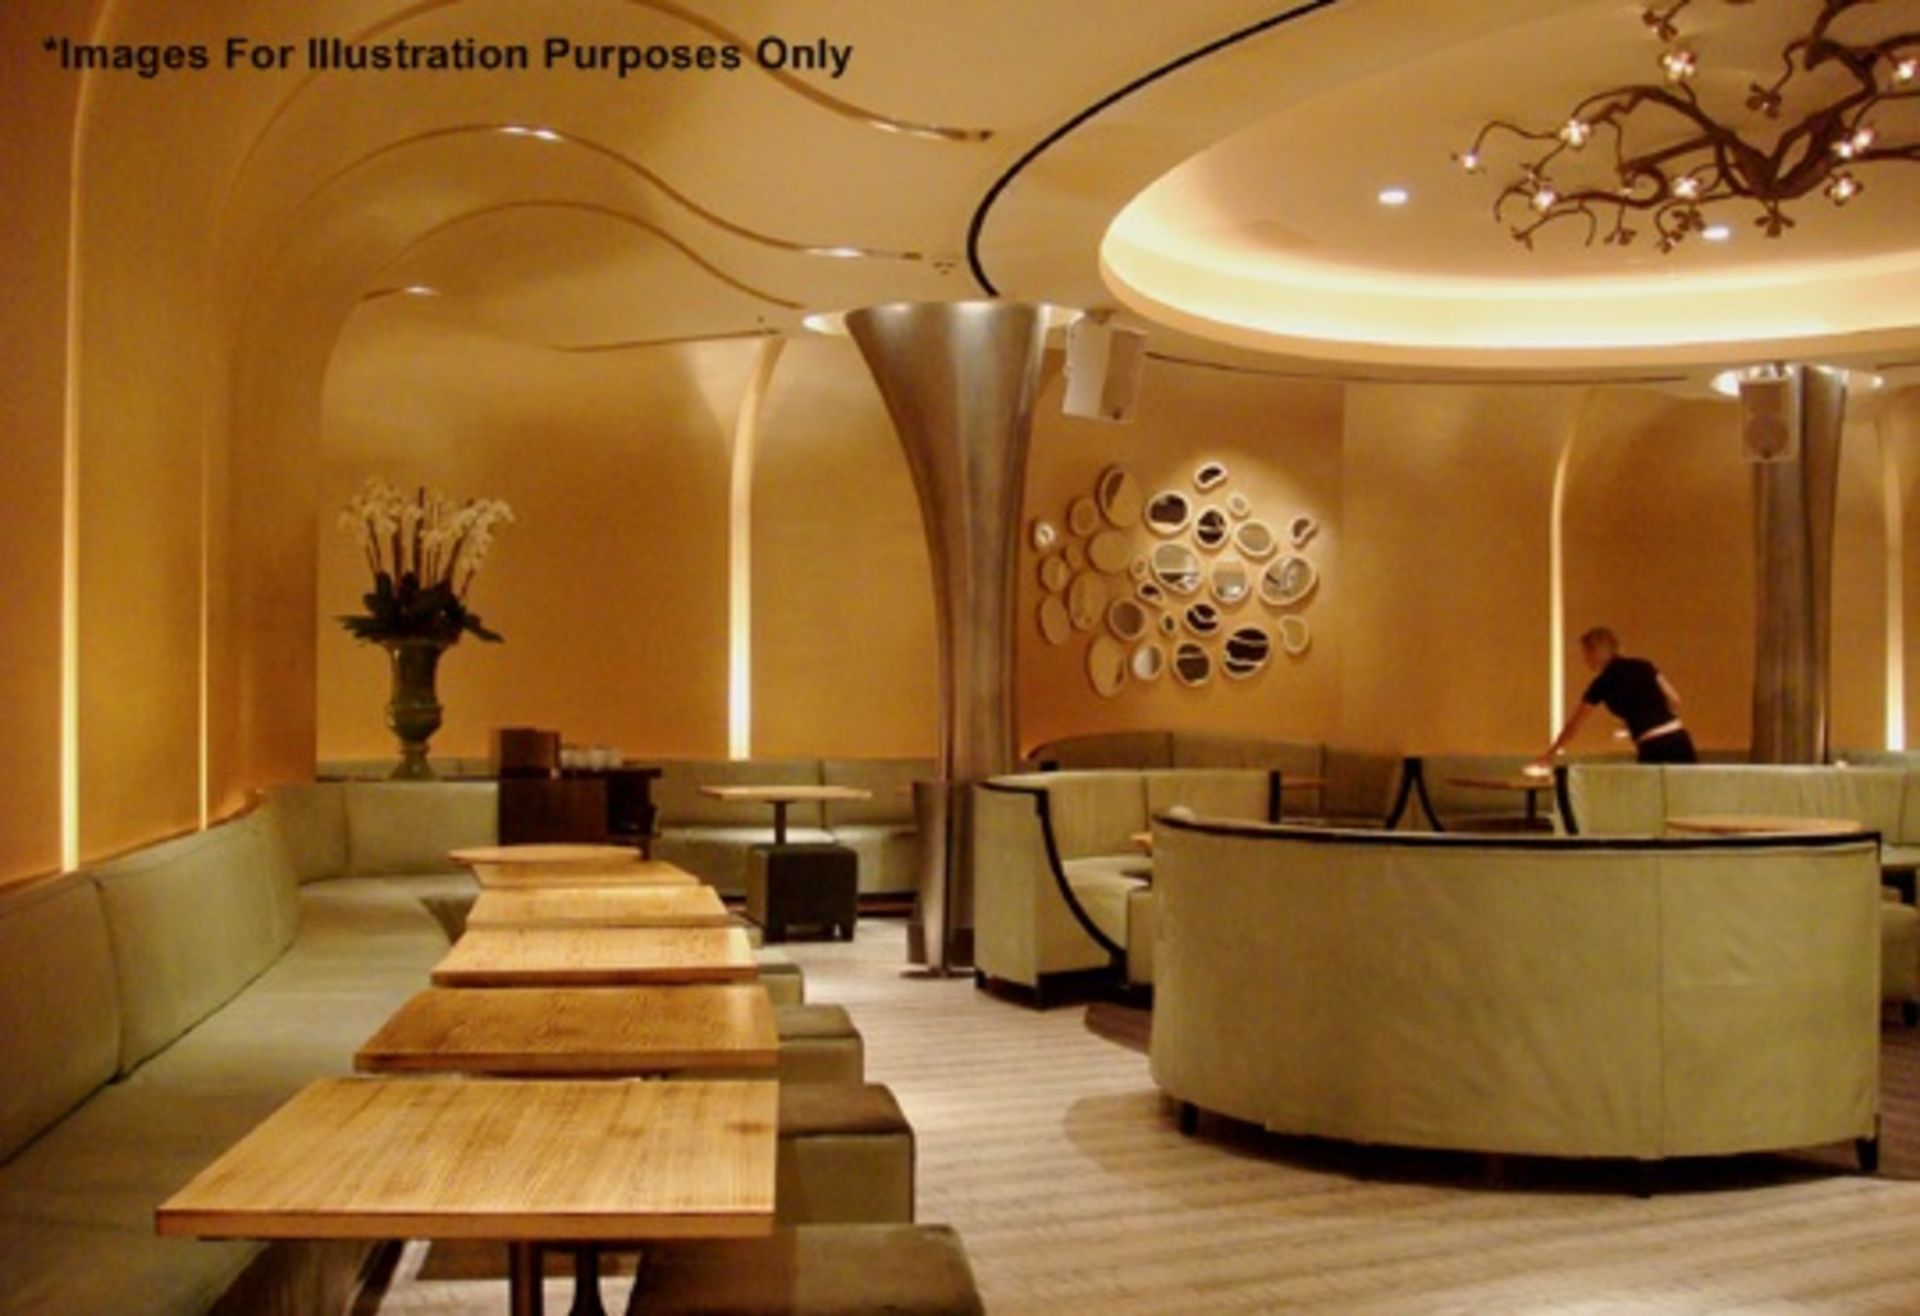 1 x Luxury Upholstered Curved Seating Area - Recently Removed From Nobu - Dimensions: W285 x D62cm x - Image 18 of 23